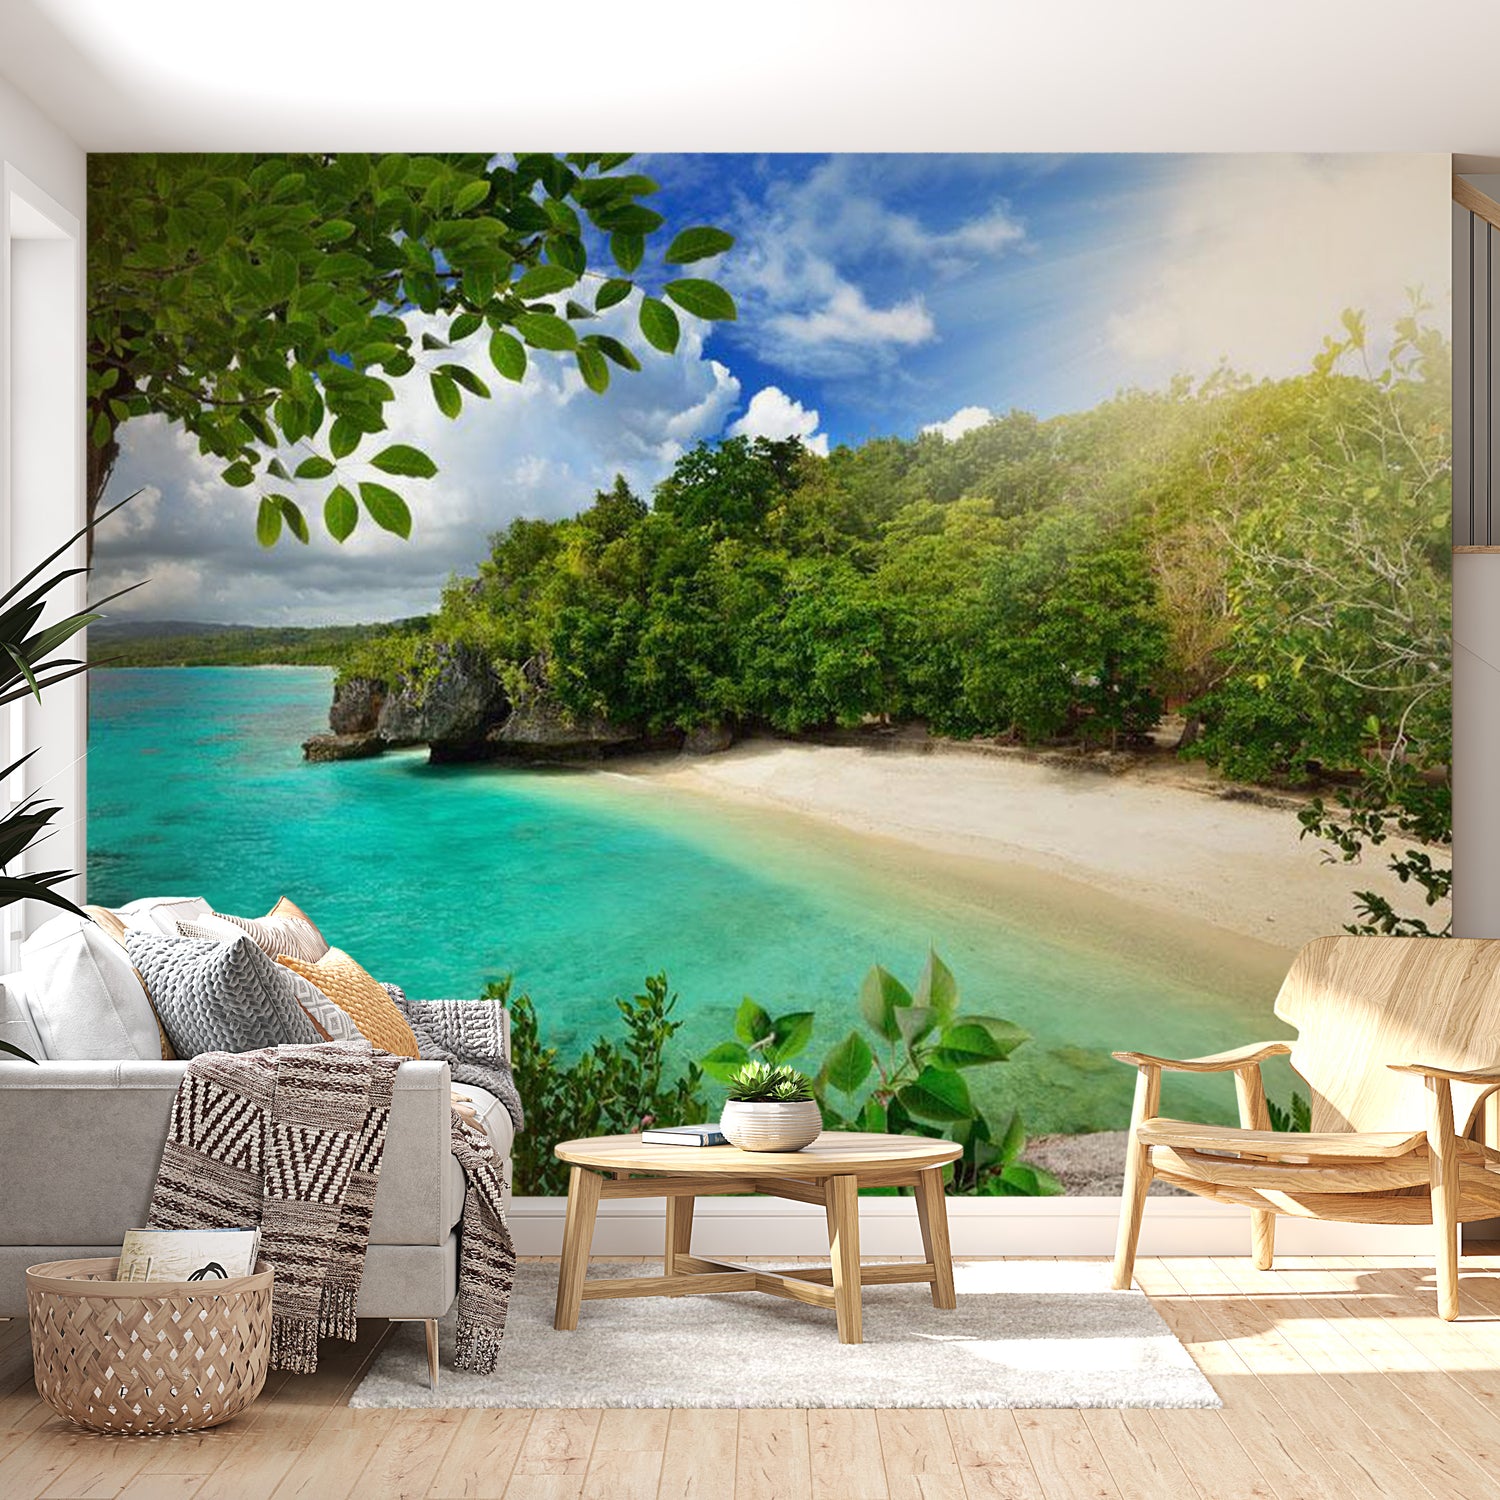 Peel & Stick Beach Wall Mural - Sunny Beach - Removable Wall Decals